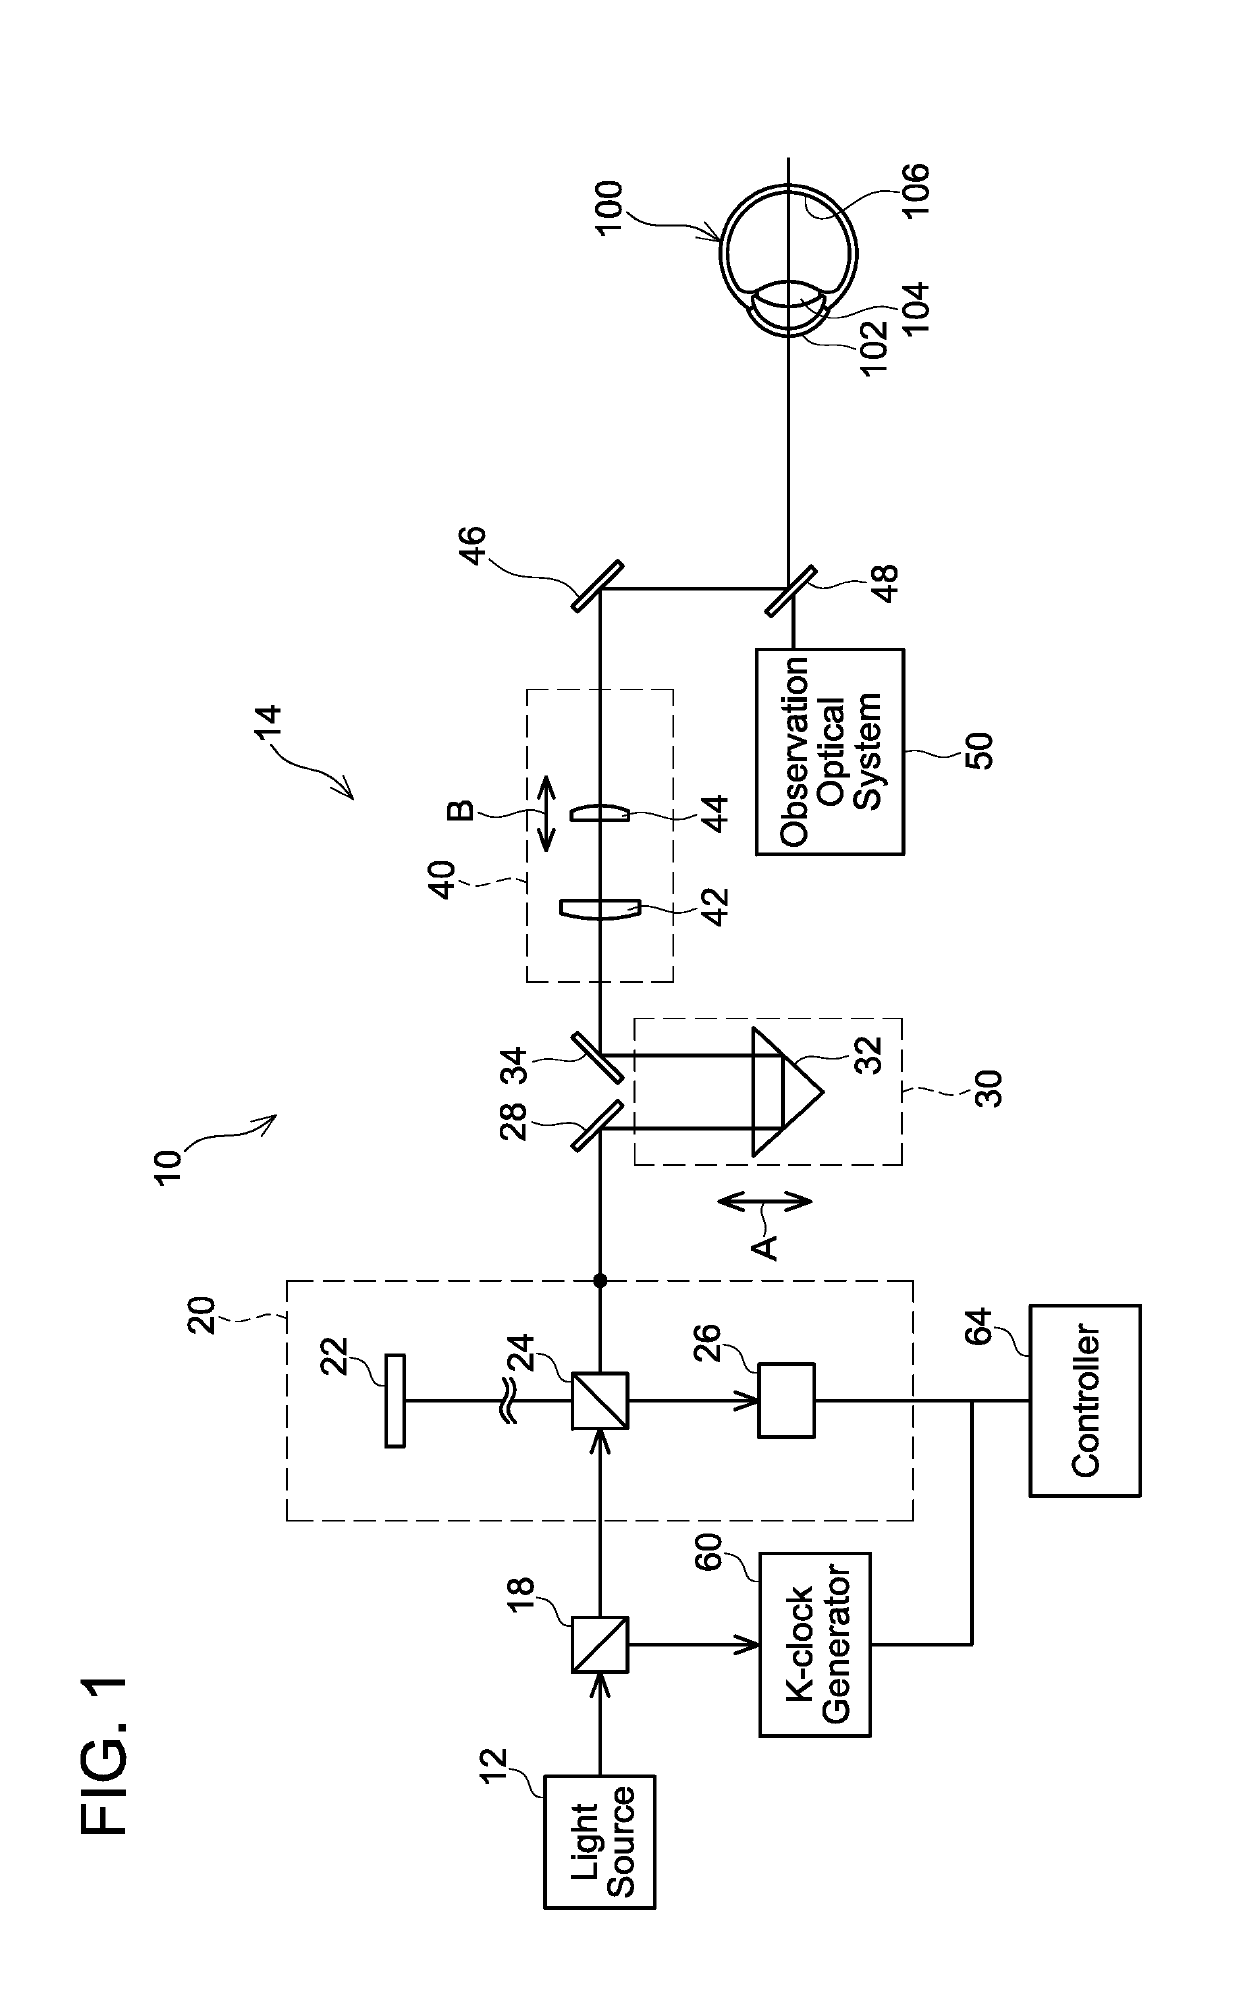 Optical coherence tomographic device and light source